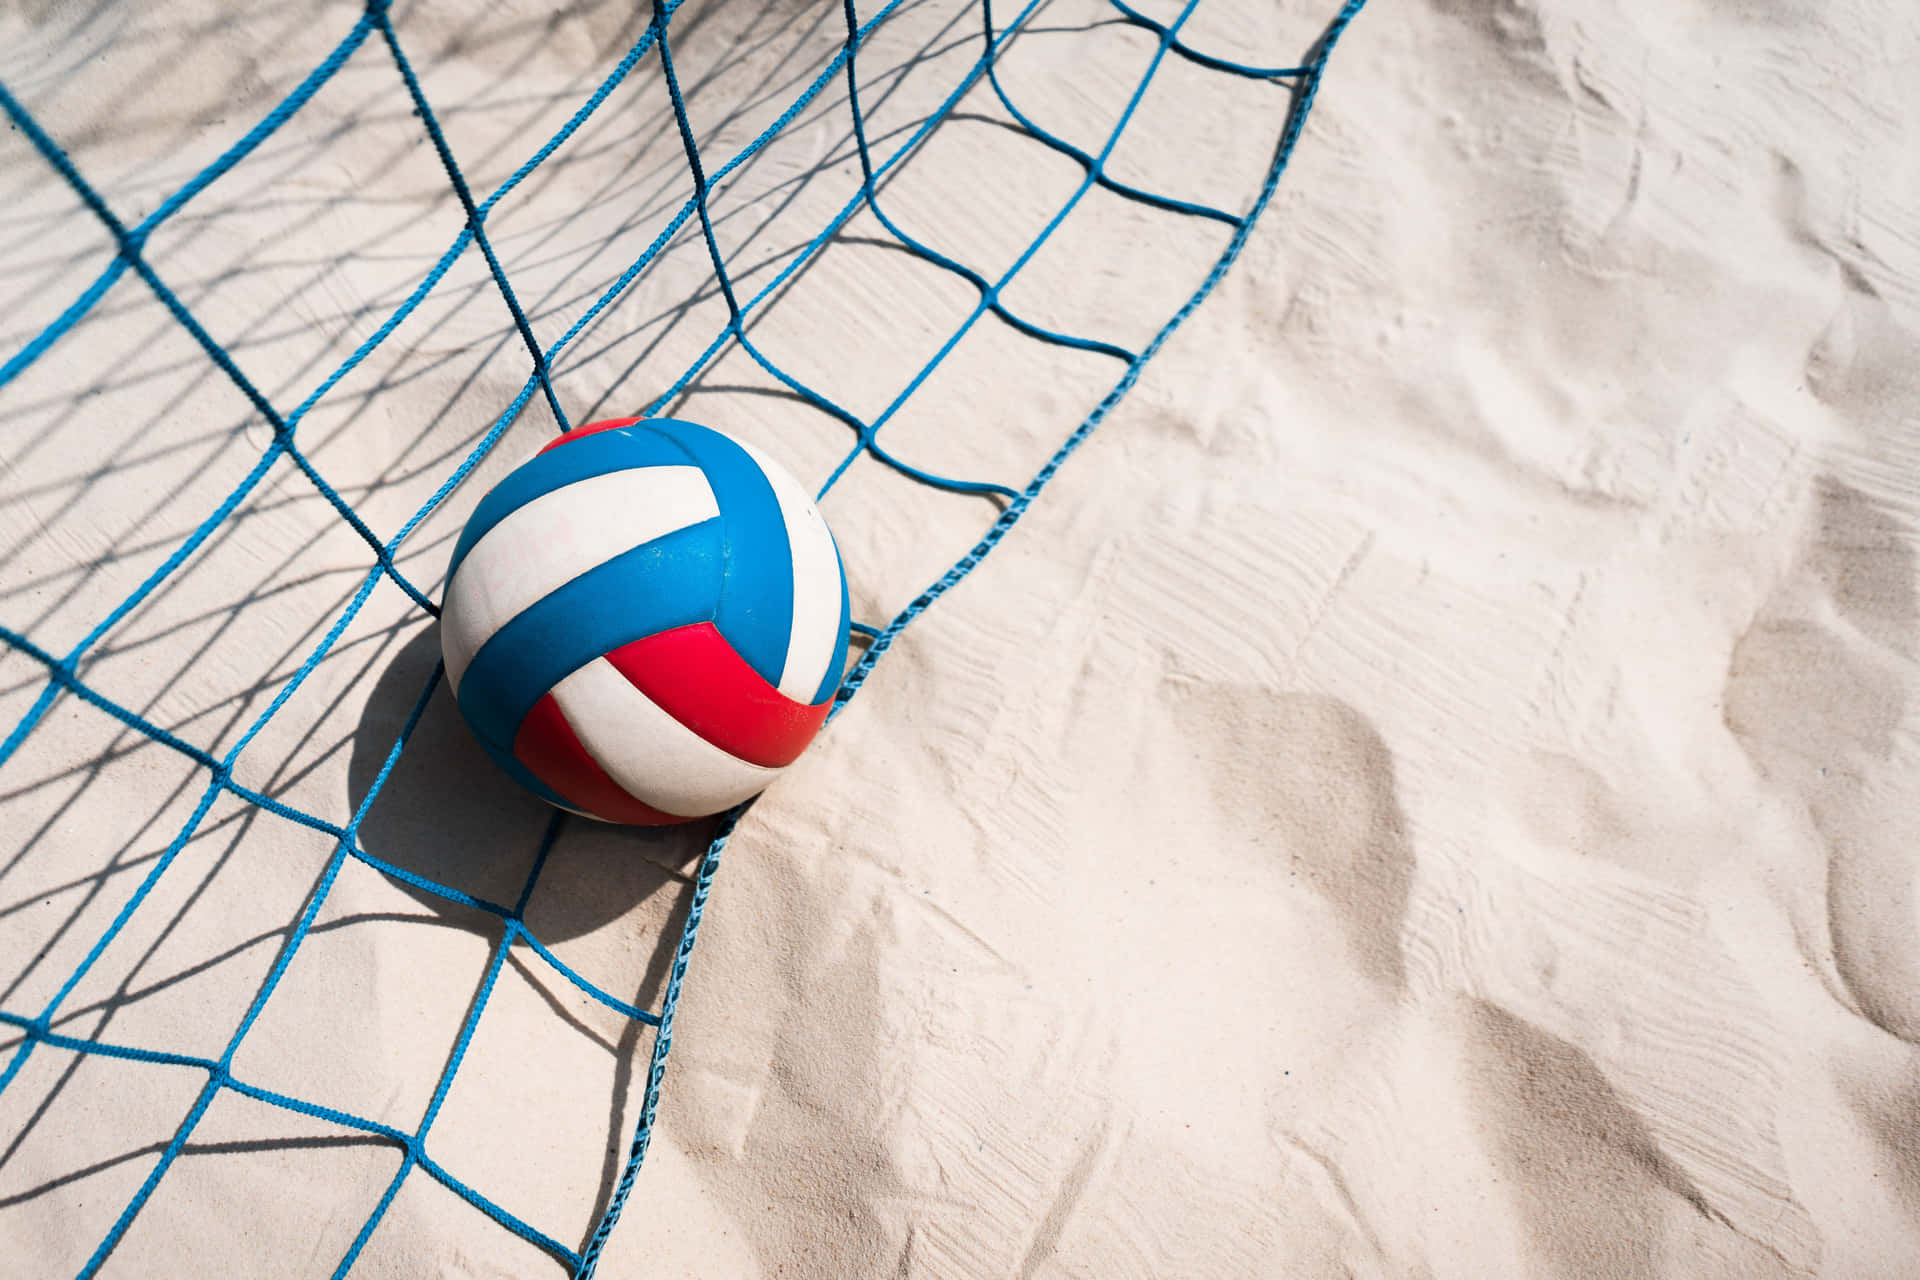 Enjoy the thrills of 4K Volleyball and bask in the glow of victory